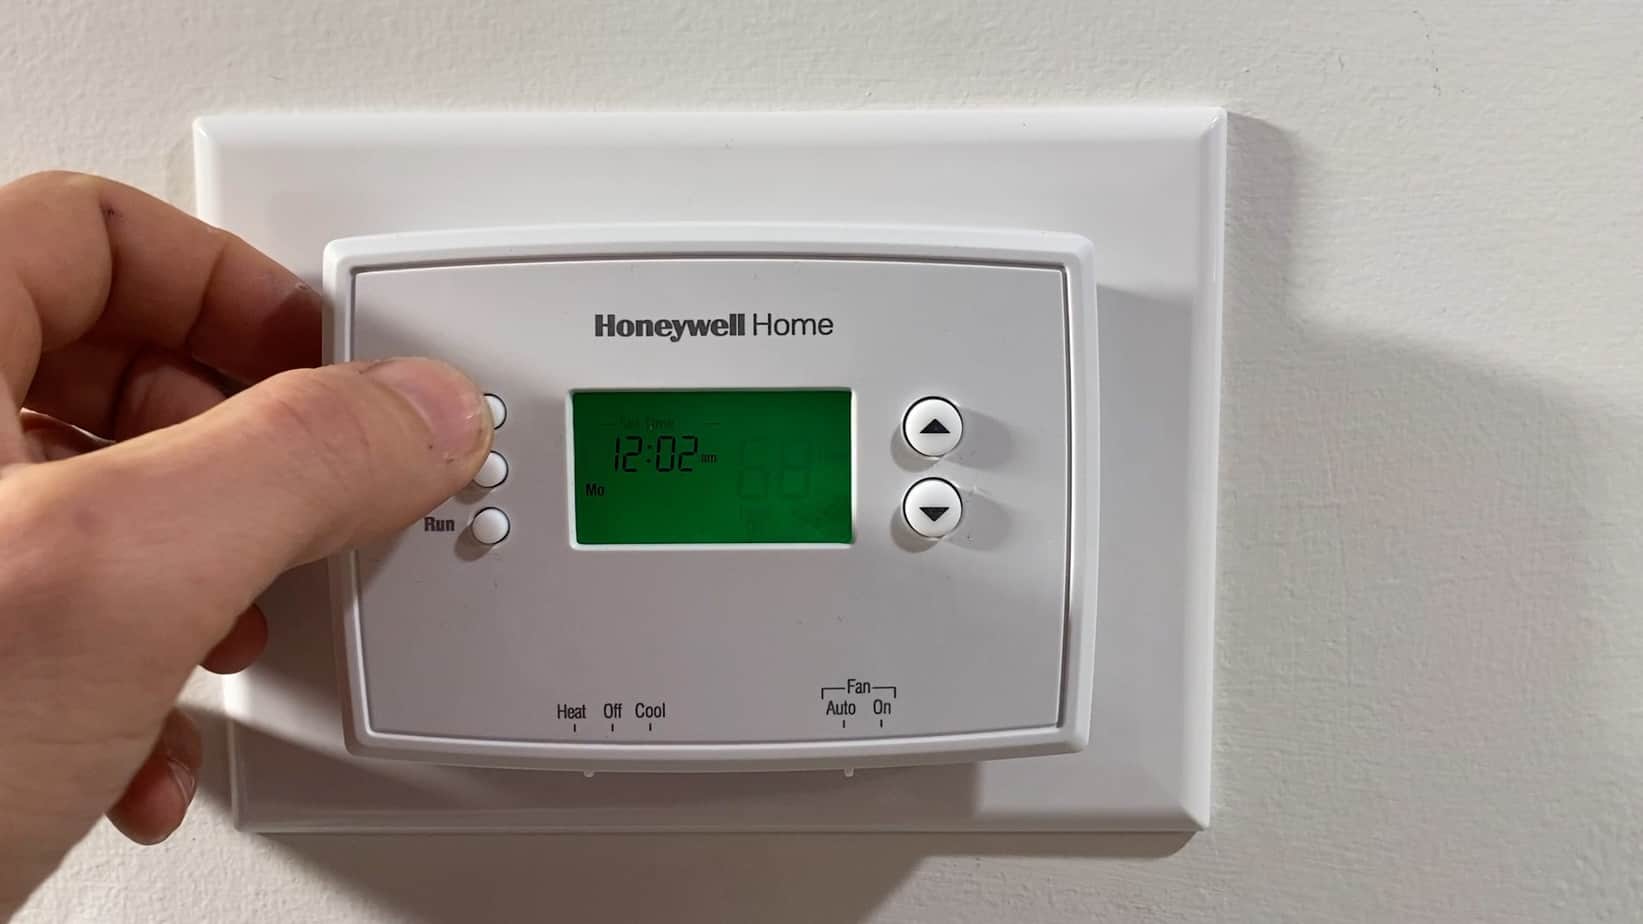 How To Change The Time On A Honeywell Home Thermostat